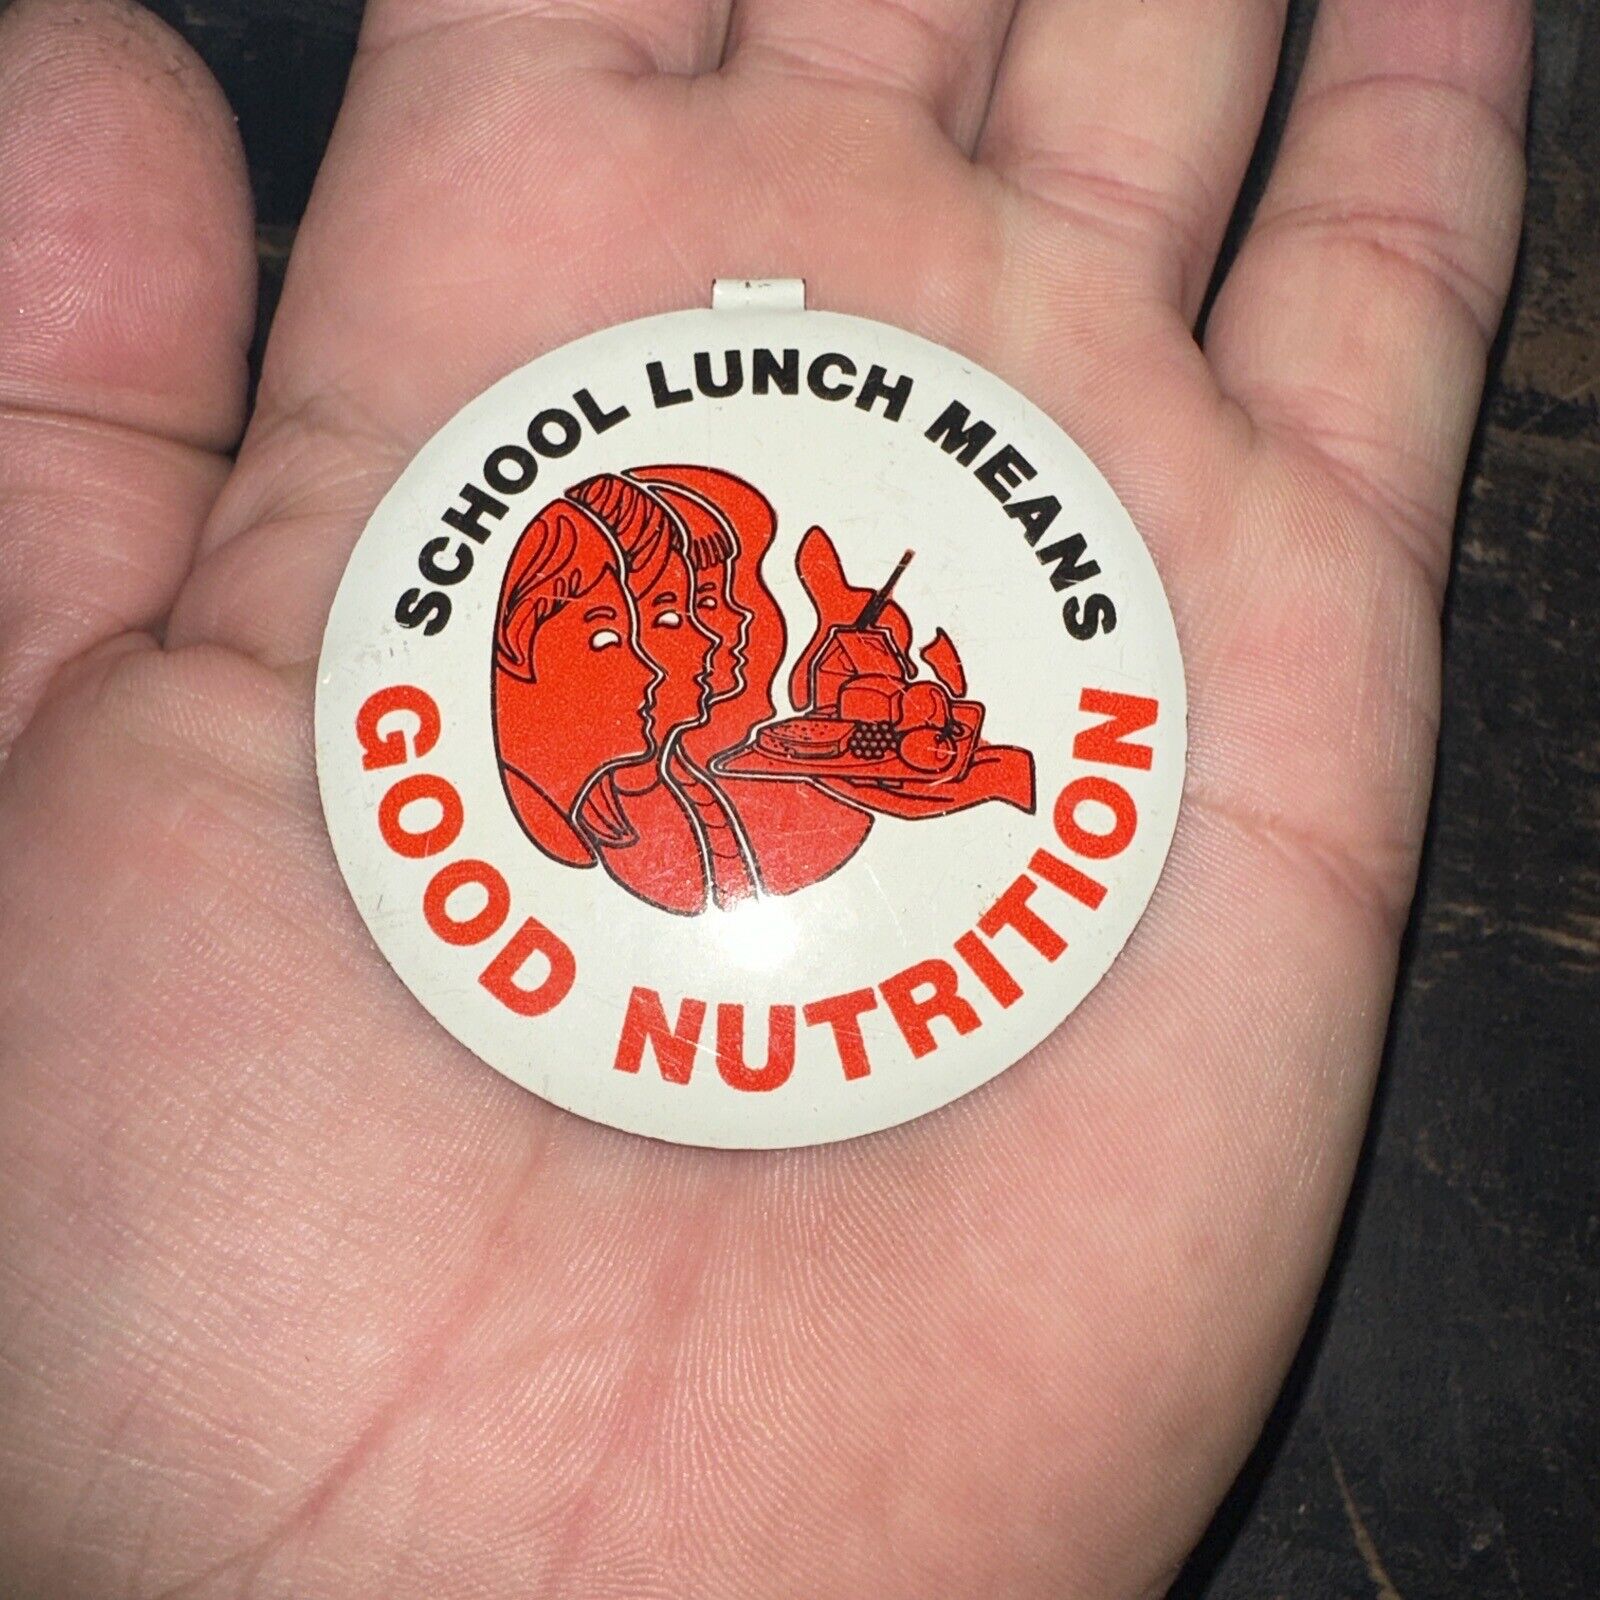 Vintage “School Lunch Means Good Nutrition” Metal Tab Pinback Button Badge Pin